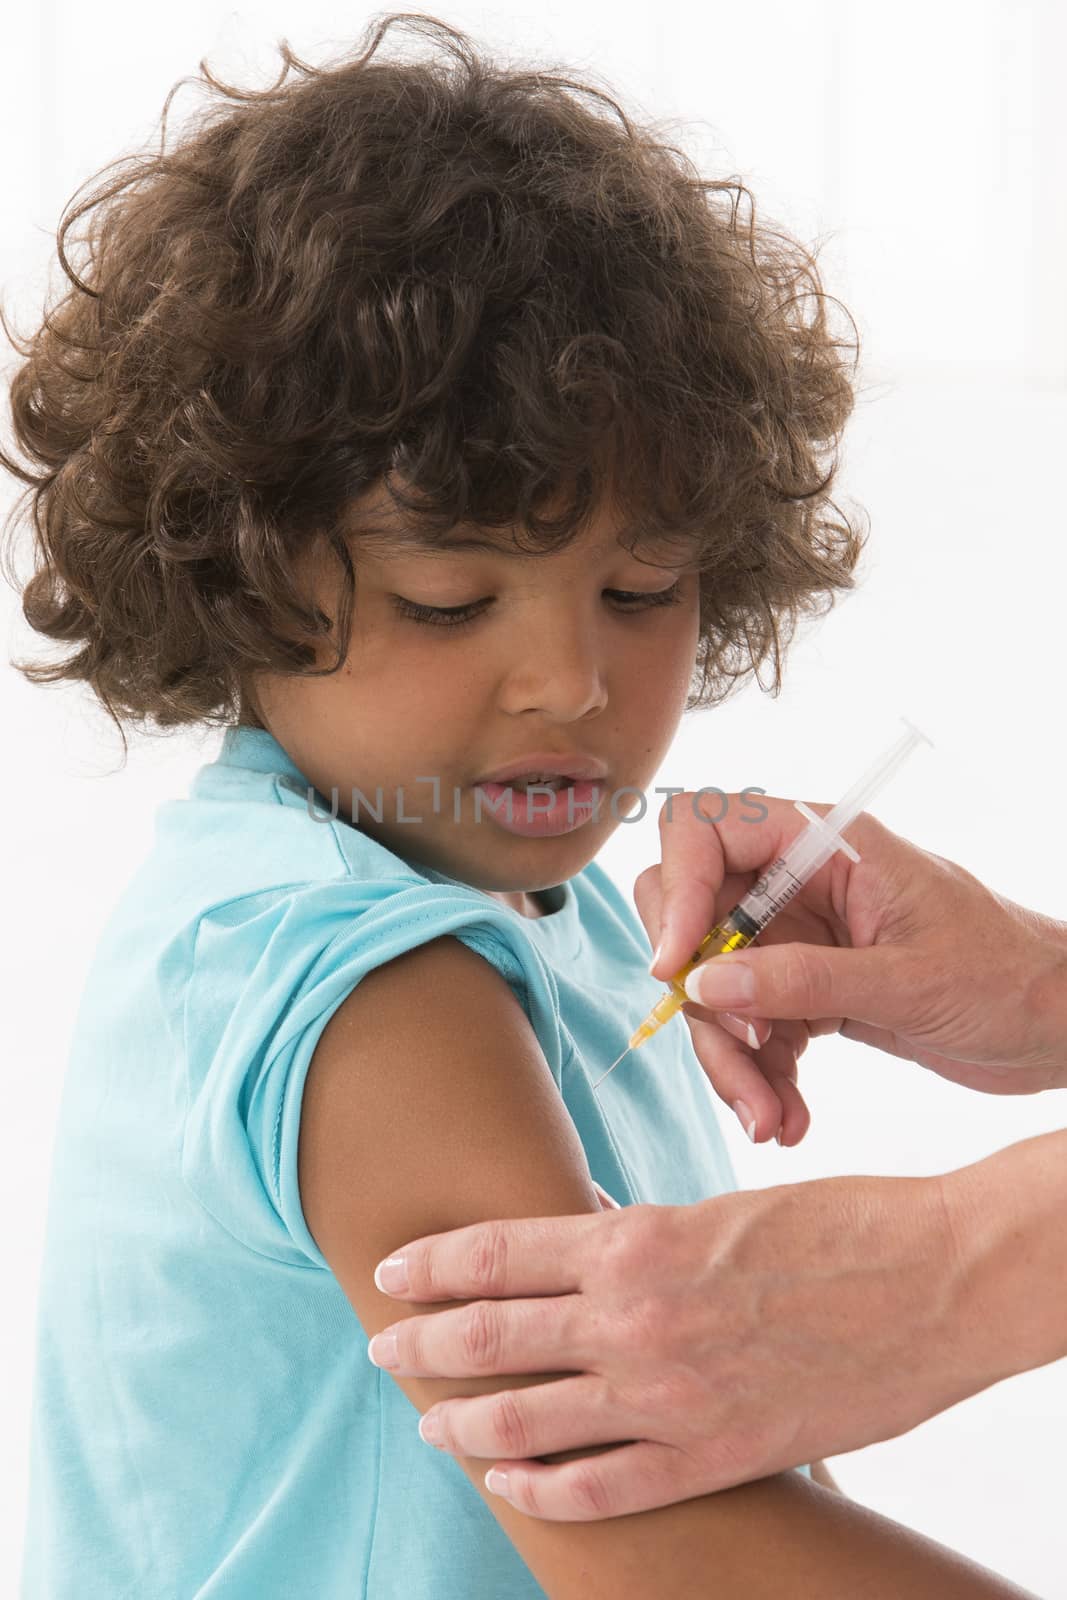 Doctor giving to a child an injection in examination room by JPC-PROD